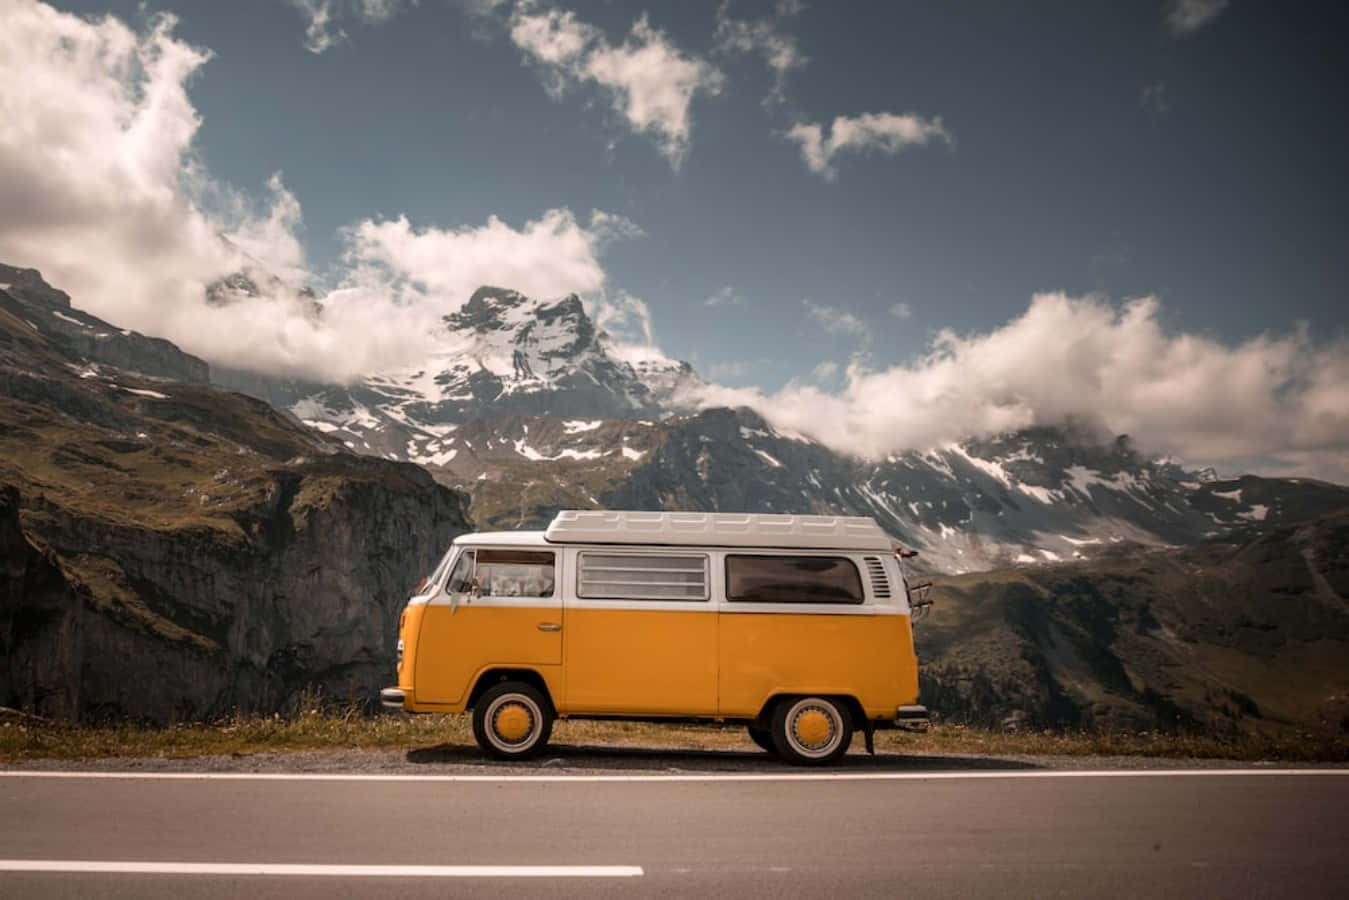 A Yellow Vw Bus Parked On The Side Of The Road